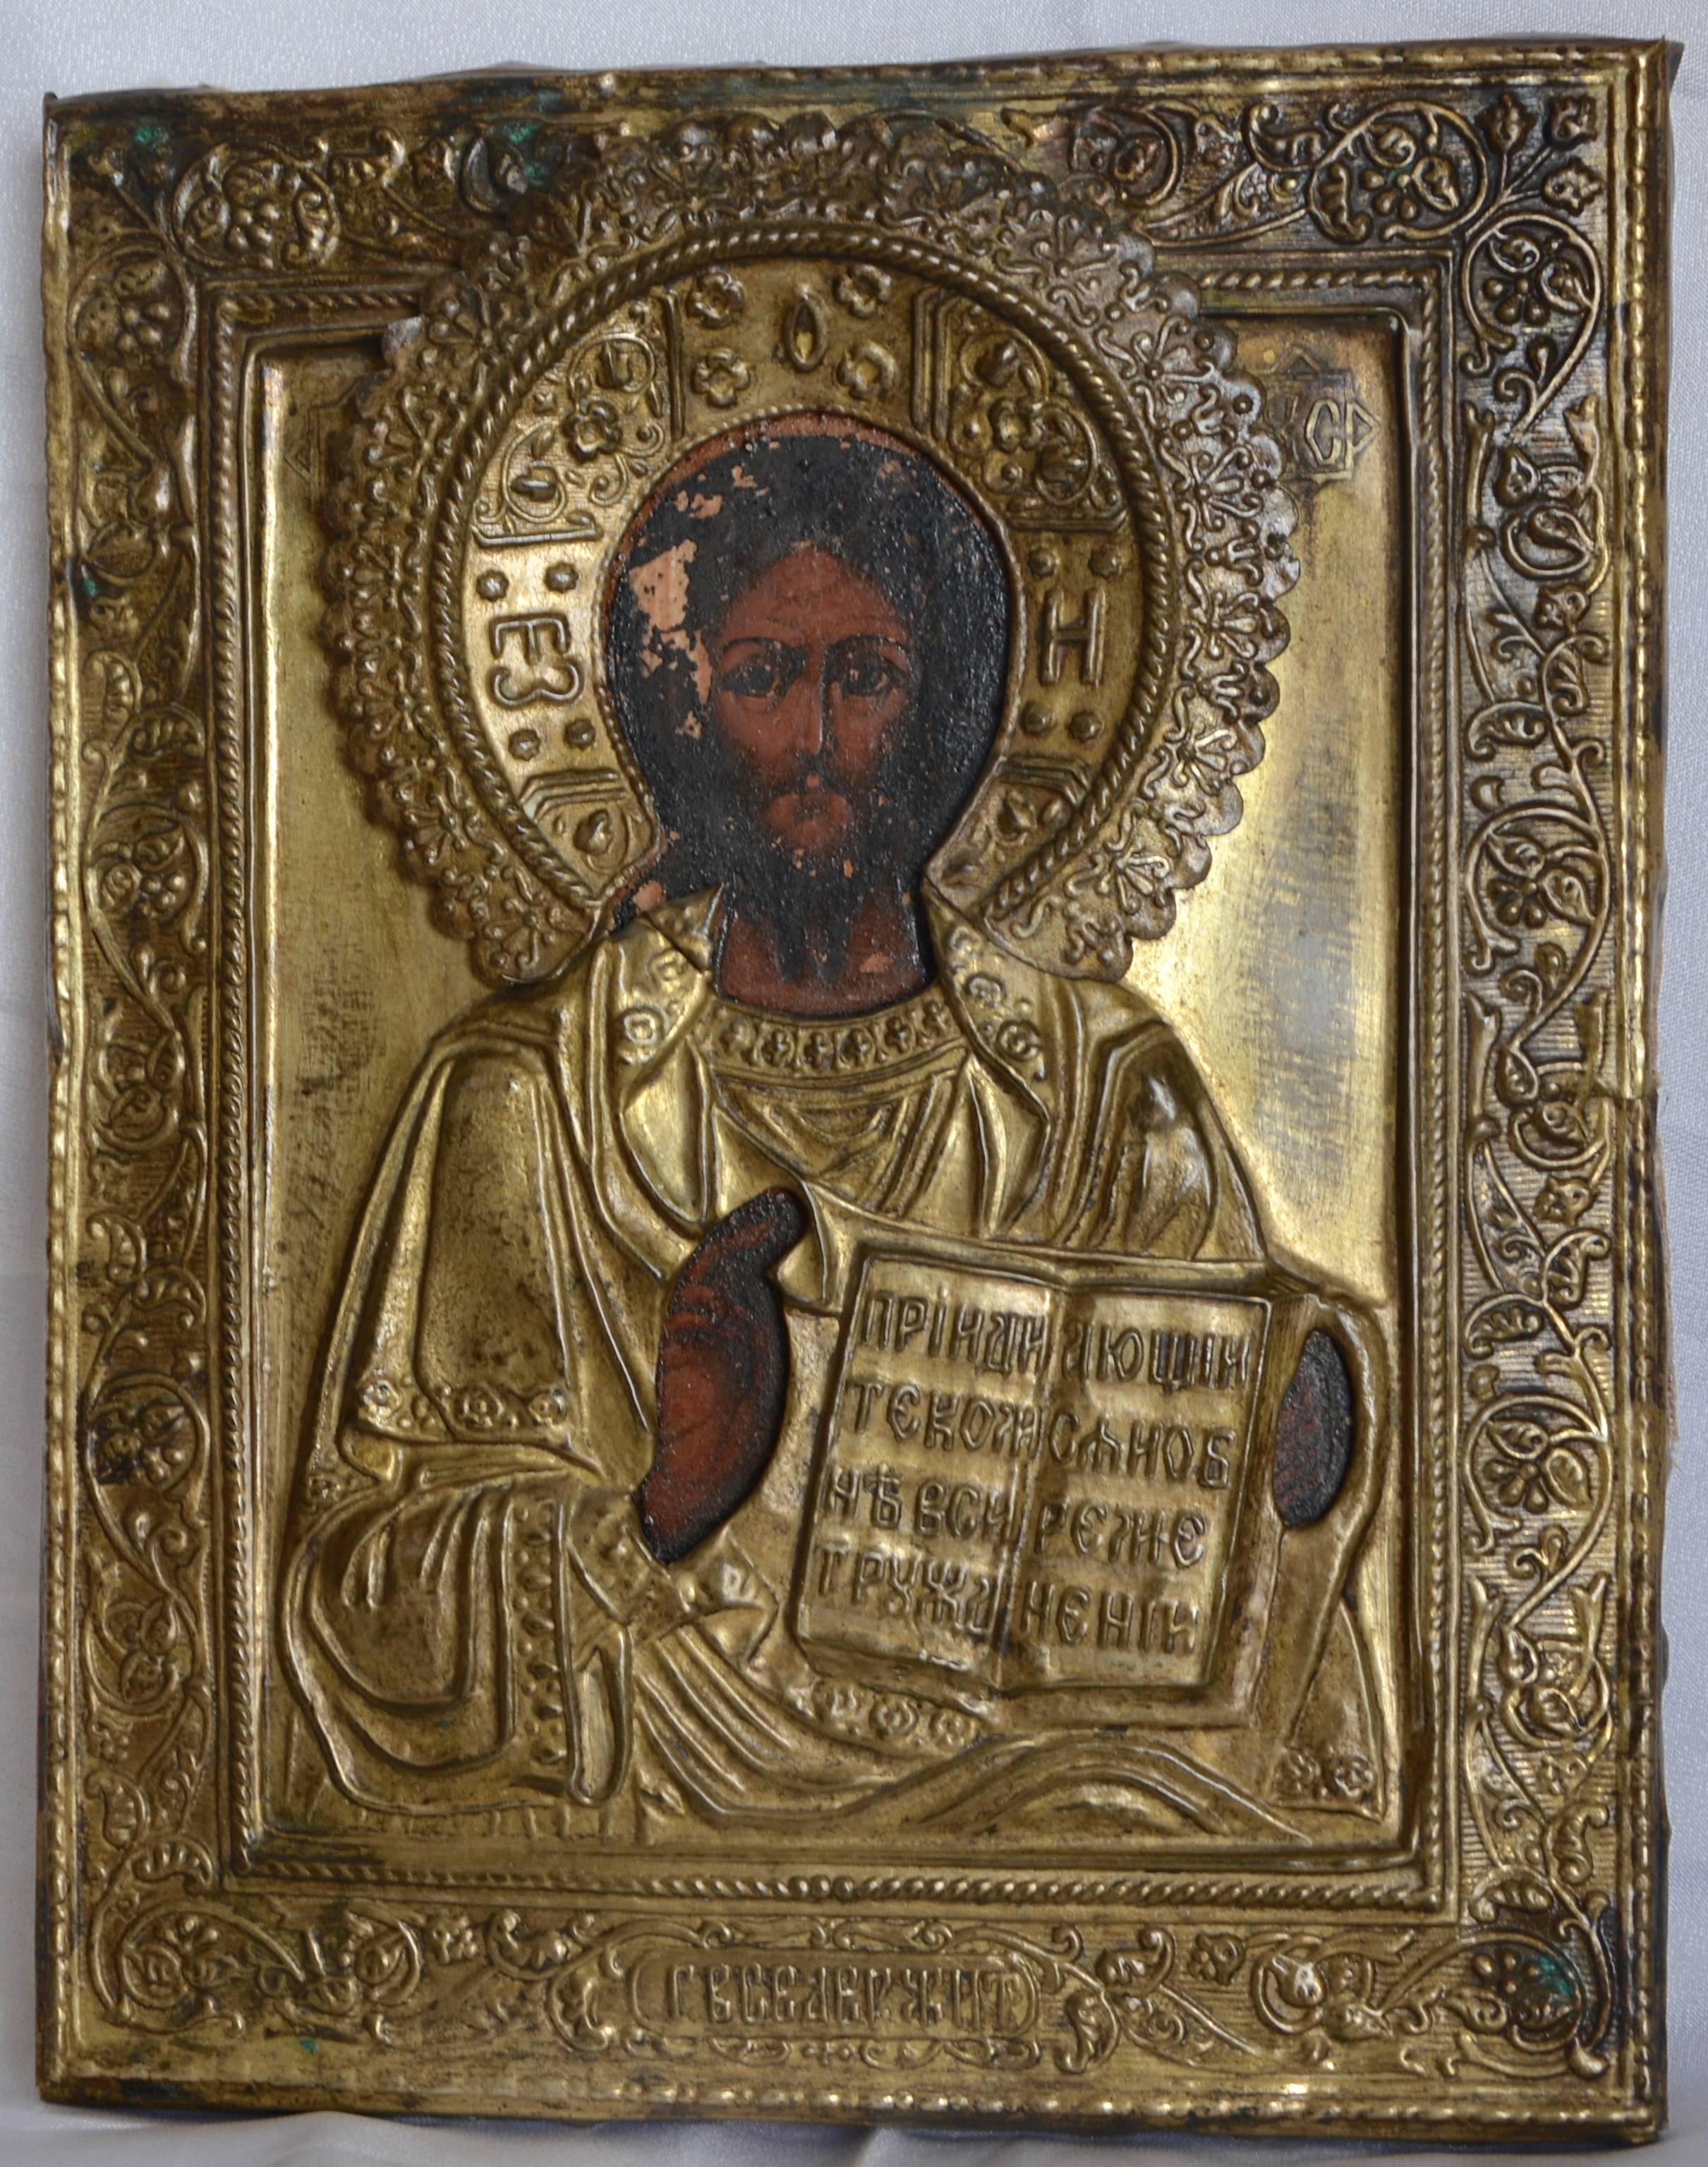 We are offering a late 19th century eastern orthodox icon depicting “Christ the Teacher”. The scene shows Christ with upraised right hand bearing the sign of benediction and open book to left. The icon is constructed of varnish and paint on wood